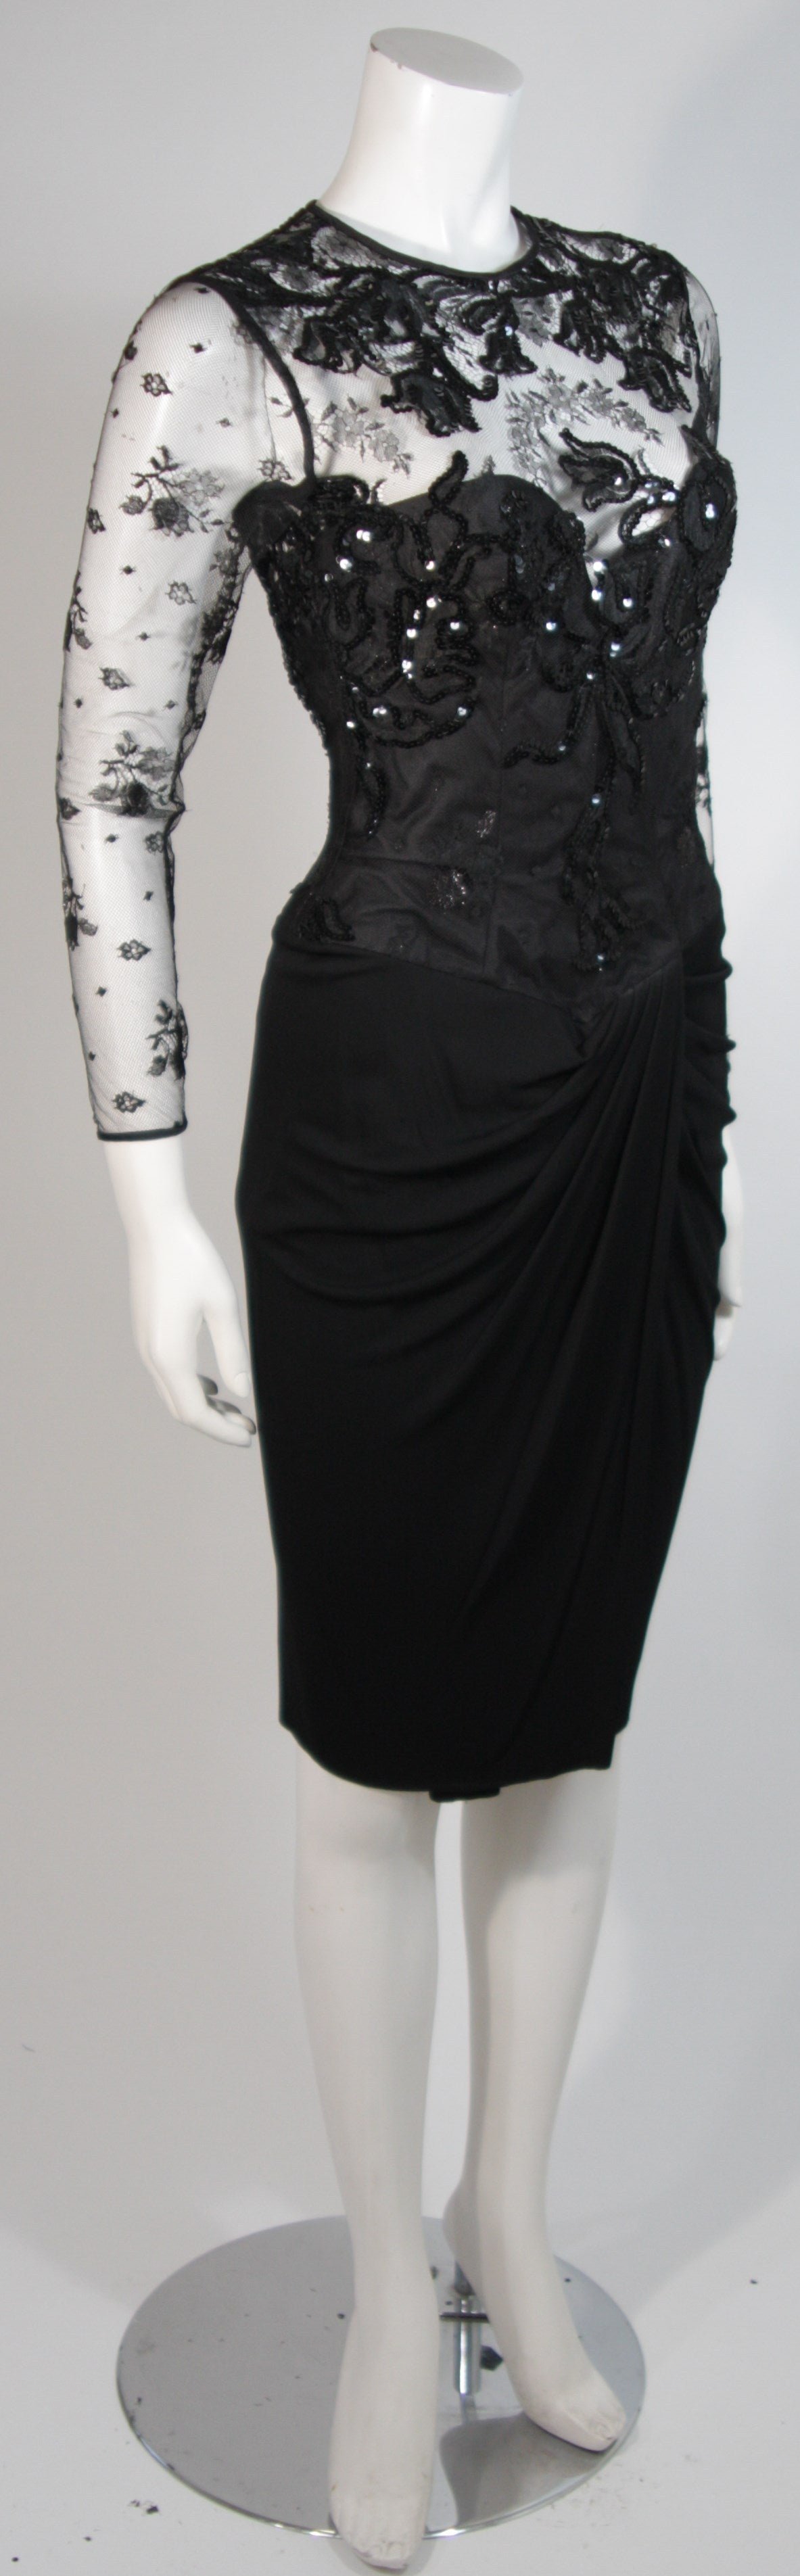 Vicky Tiel Black Lace Cocktail Dress with Draped Jersey Skirt Size Small In Excellent Condition For Sale In Los Angeles, CA